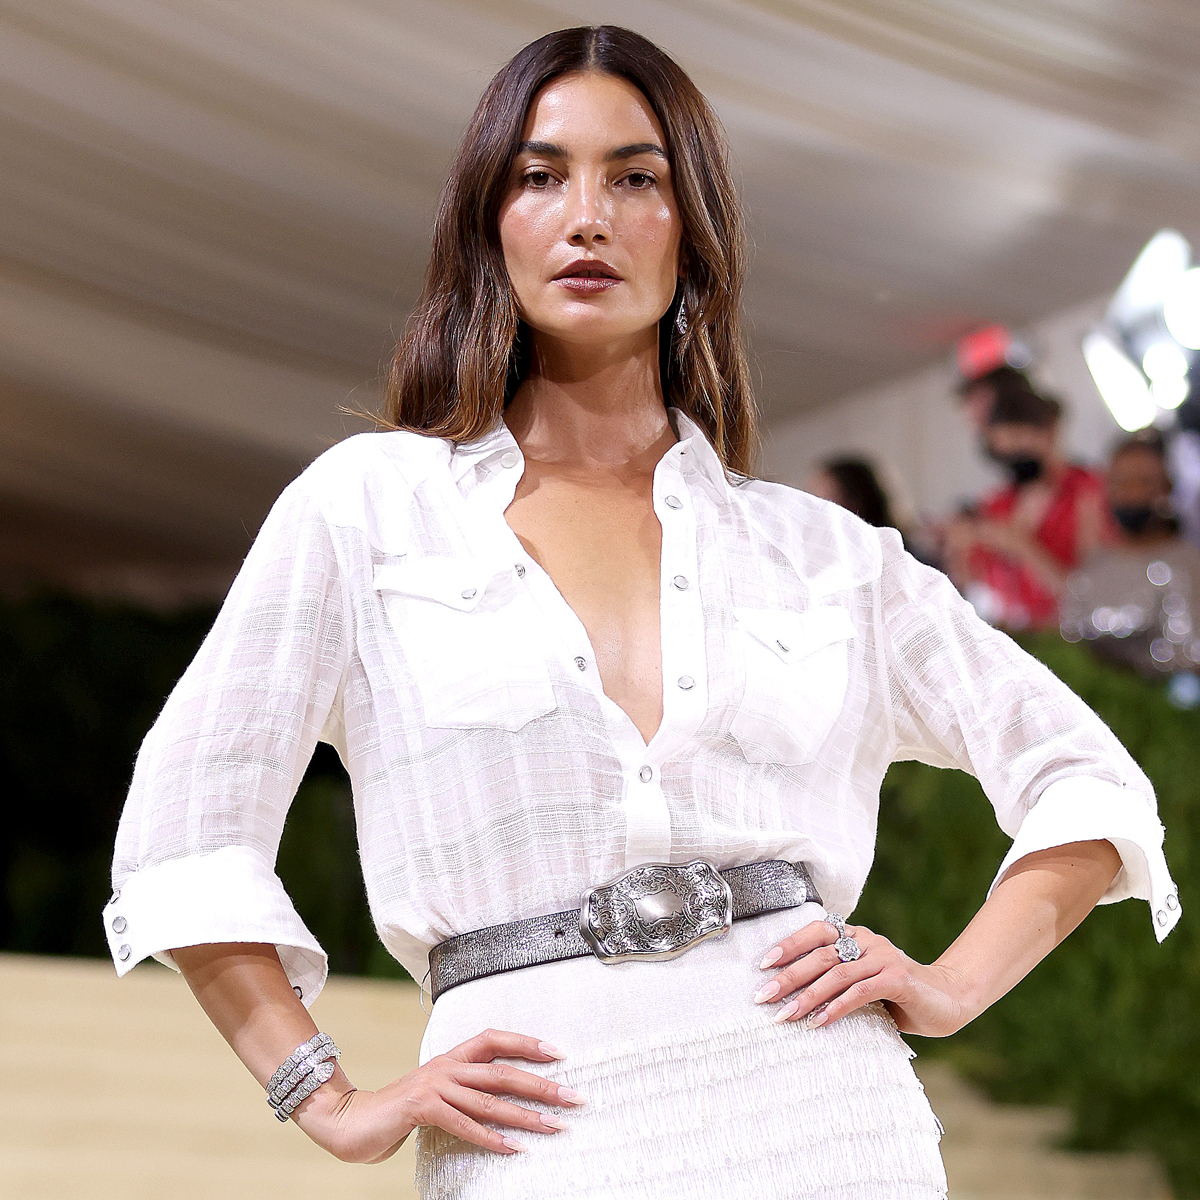 https://akns-images.eonline.com/eol_images/Entire_Site/2021813/rs_1200x1200-210913180813-1200-Lily-Aldridge-2021-met-gala.jpg?fit=around%7C660:372&output-quality=90&crop=660:372;center,top